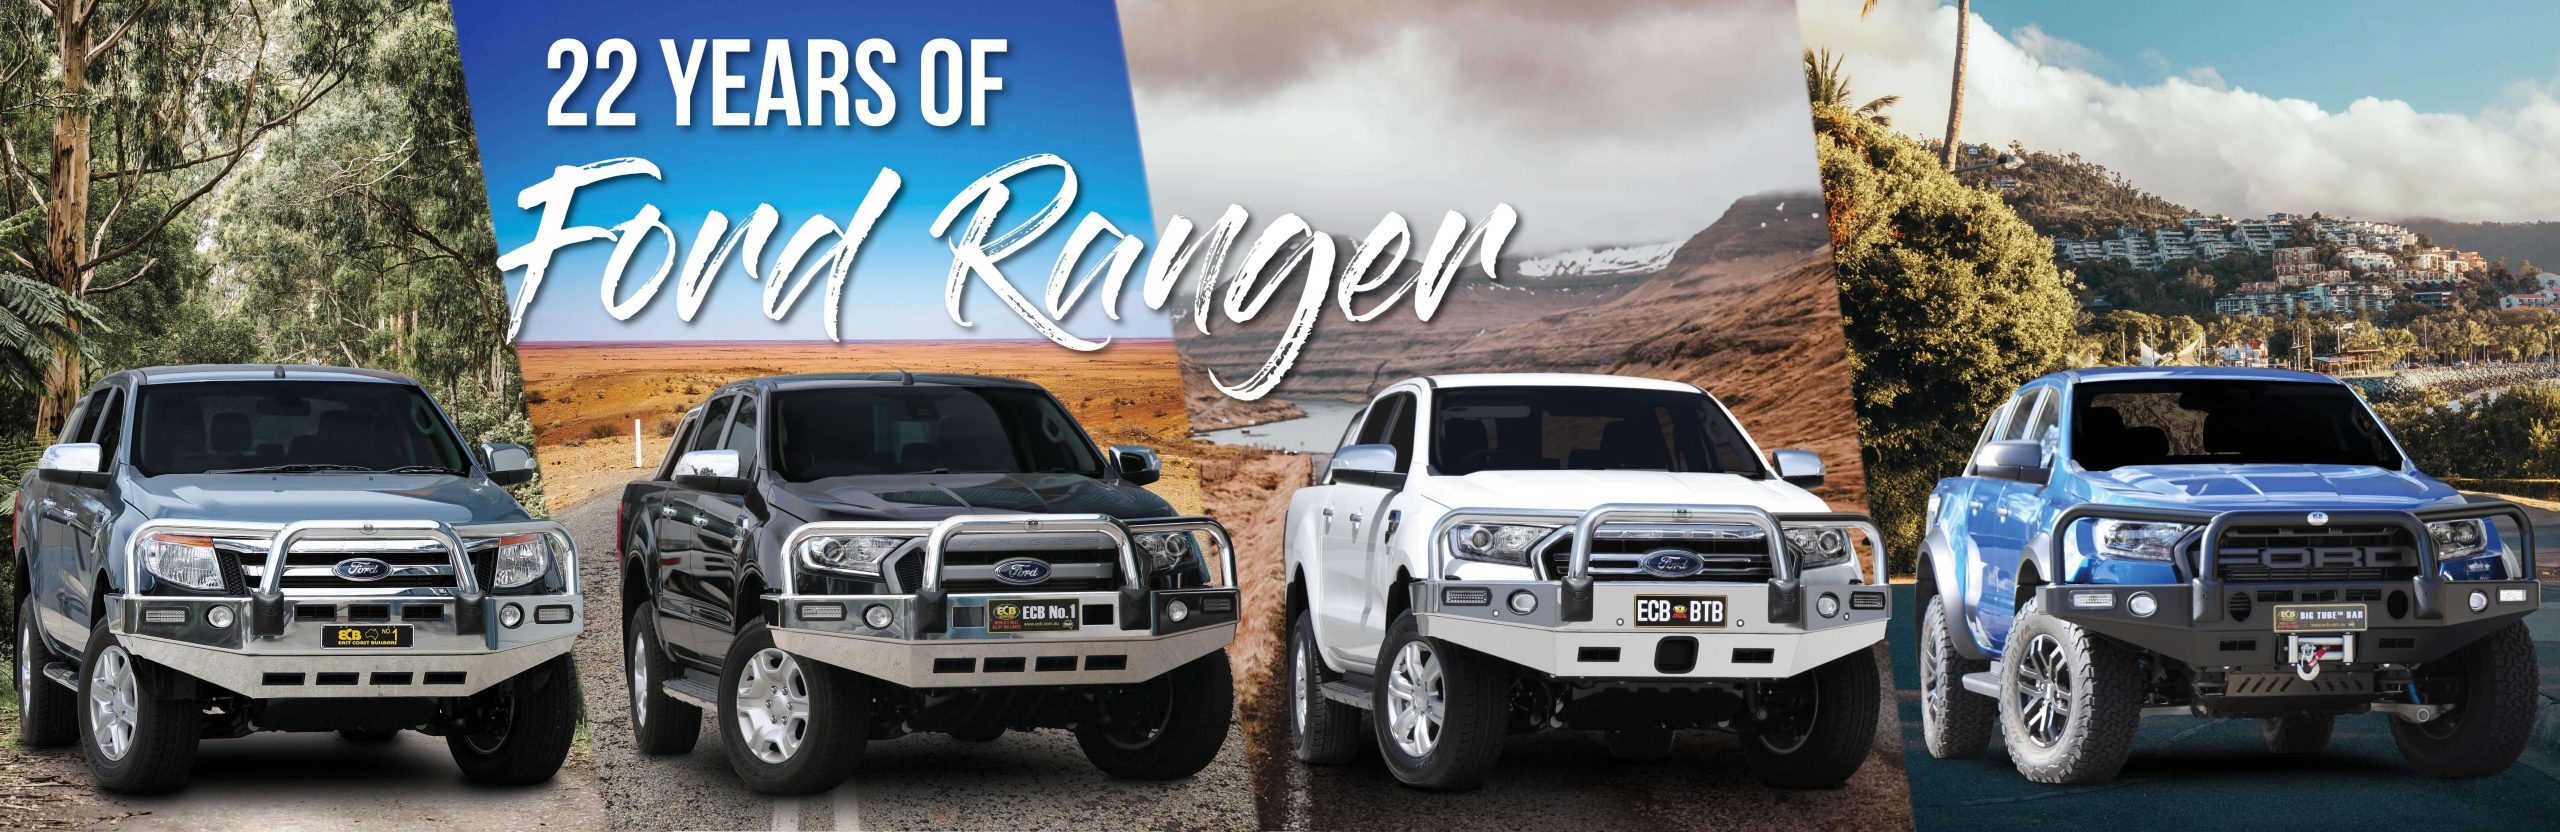 Ford Ranger Range of Frontal Protection